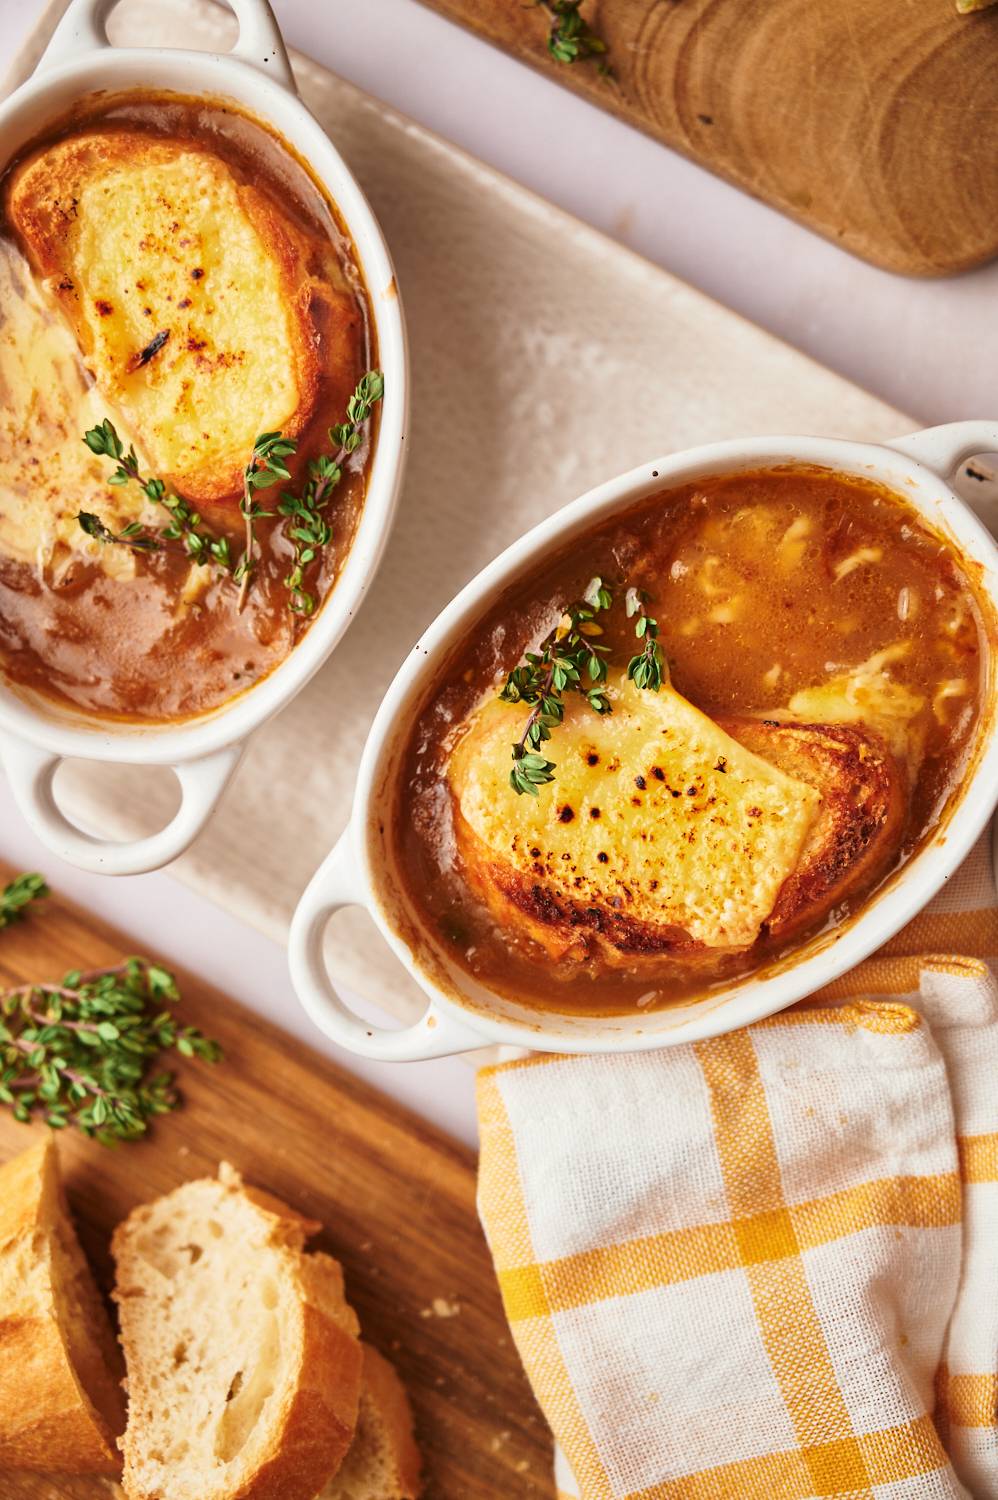 Crockpot French onion soup in two bowls with toasted bread, melted cheese, and fresh thyme.